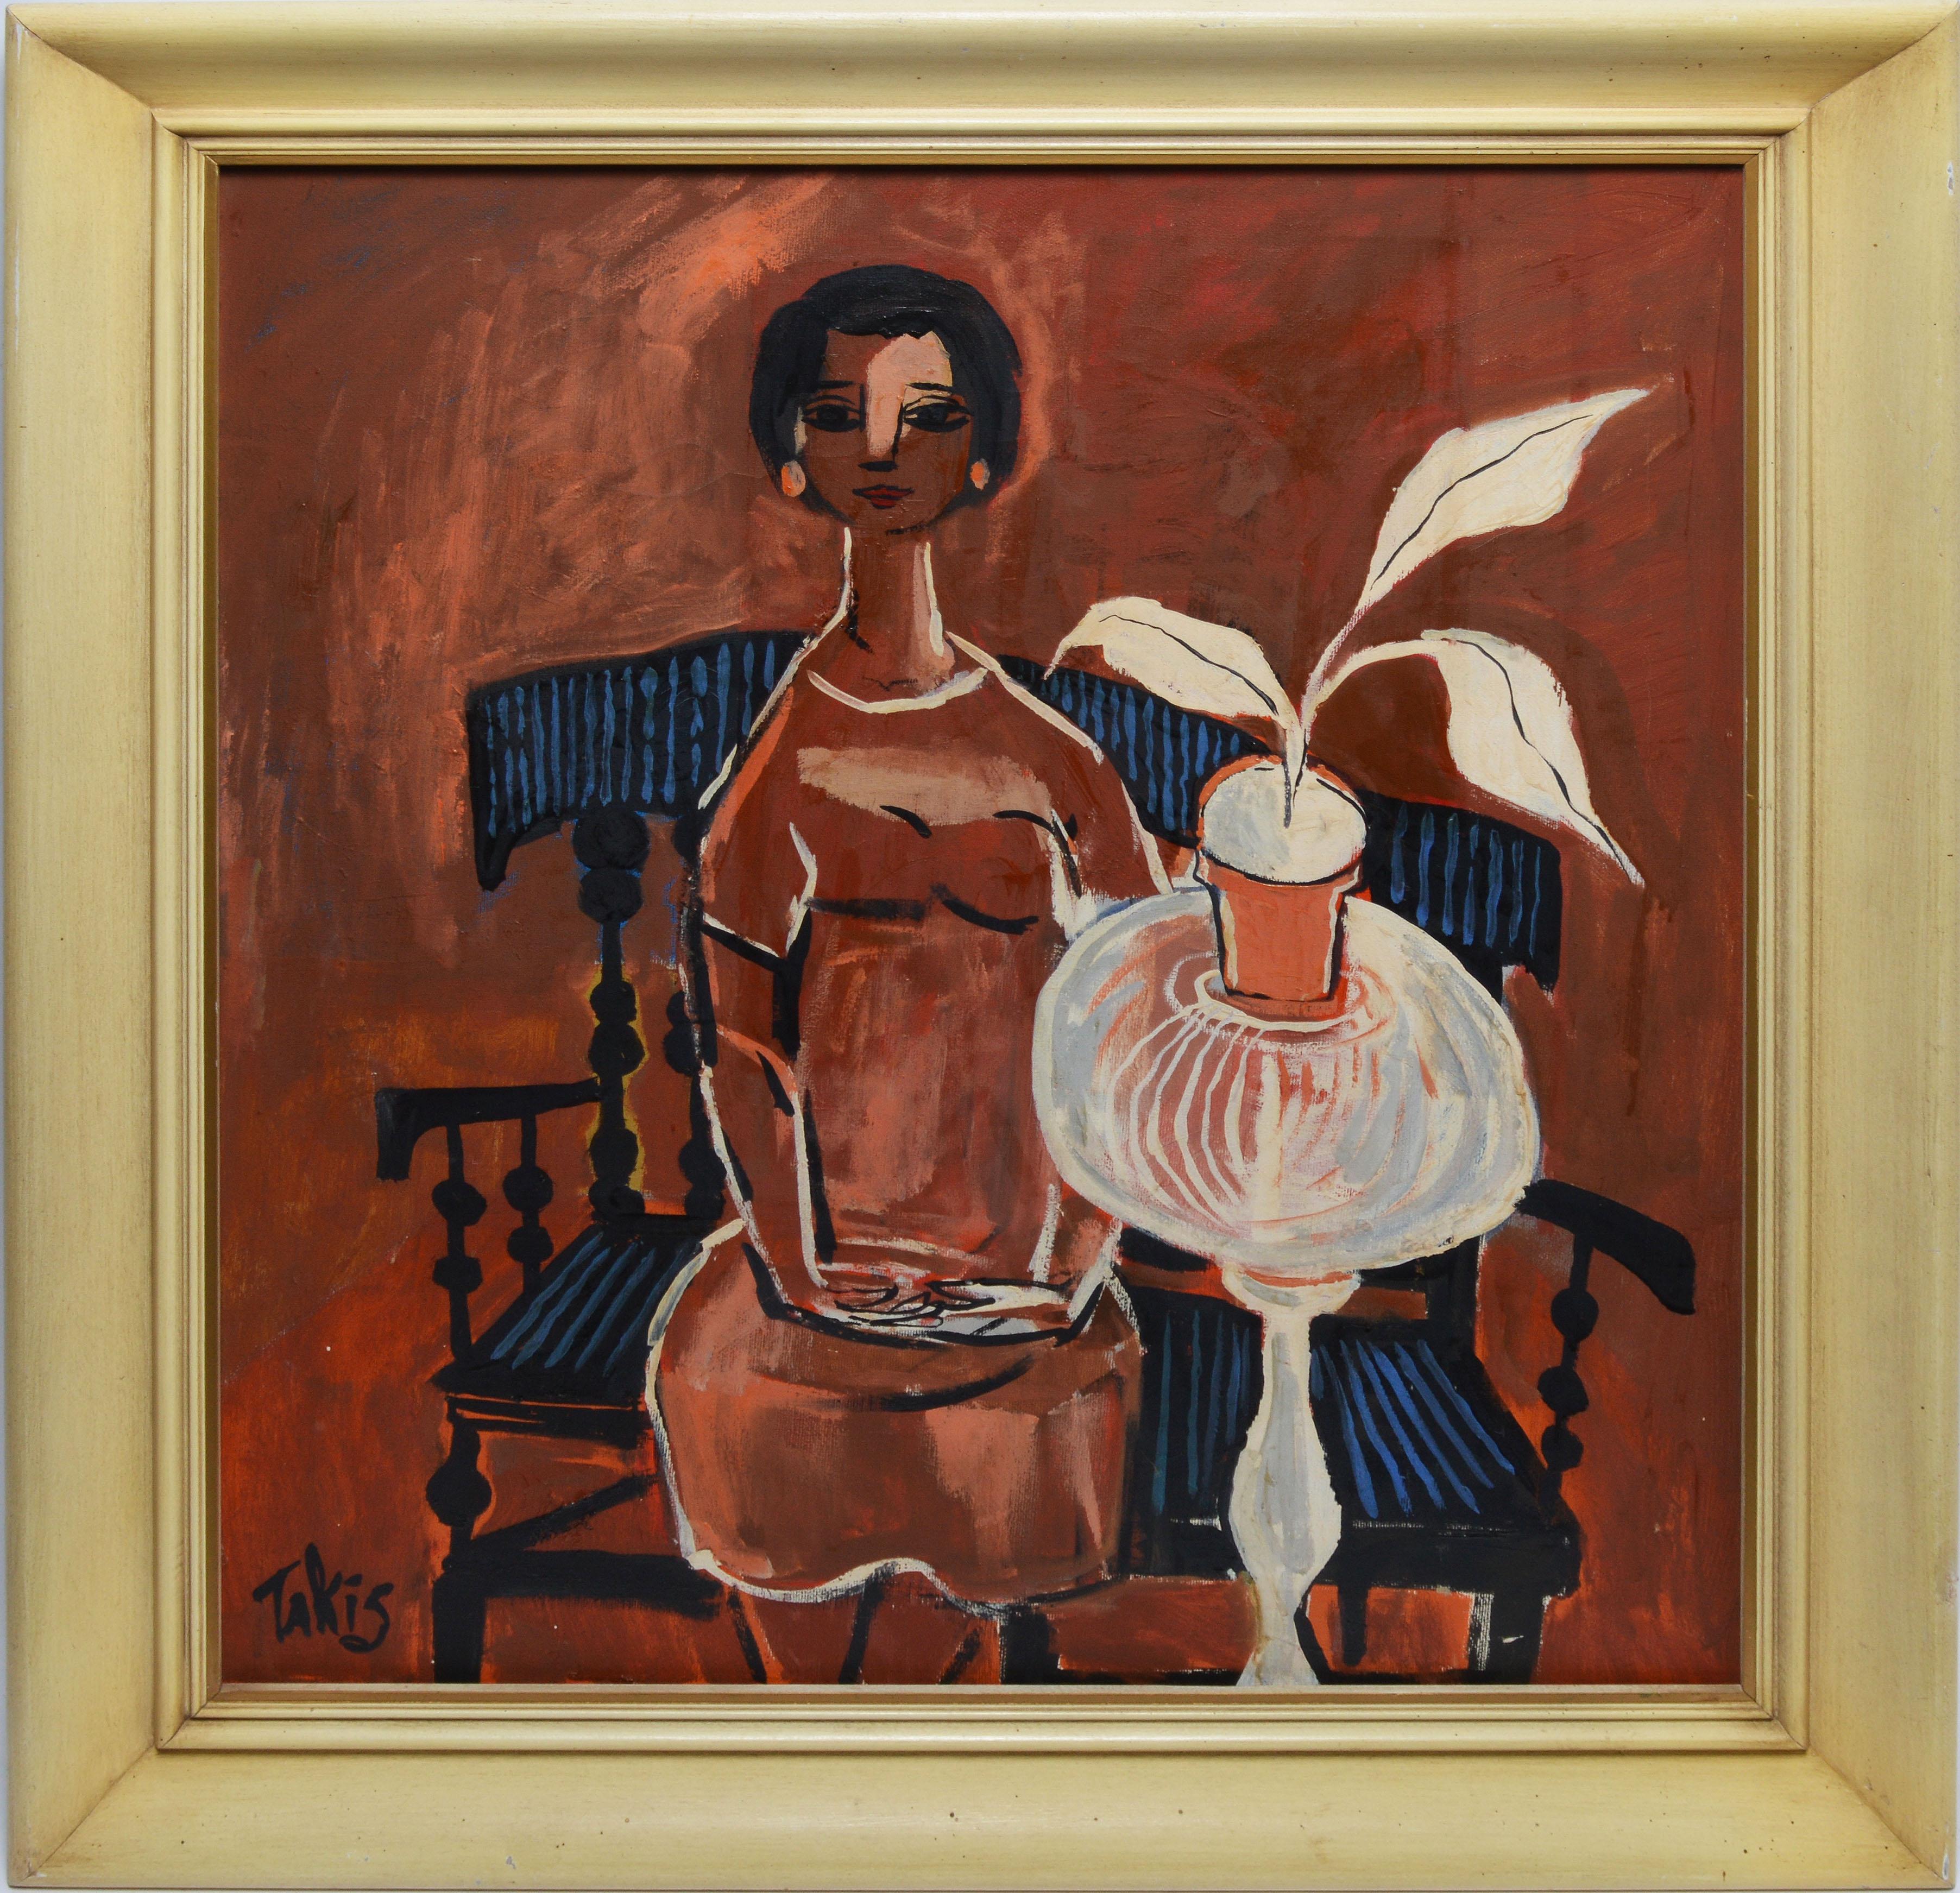 Vintage modernist portrait and still life by Nicholas Takis  (1903 - 1965). Oil on canvas, circa 1945. Signed.  Displayed in a period modernist frame.  Image, 20"L x 24"H, overall 25"L x 29"H.